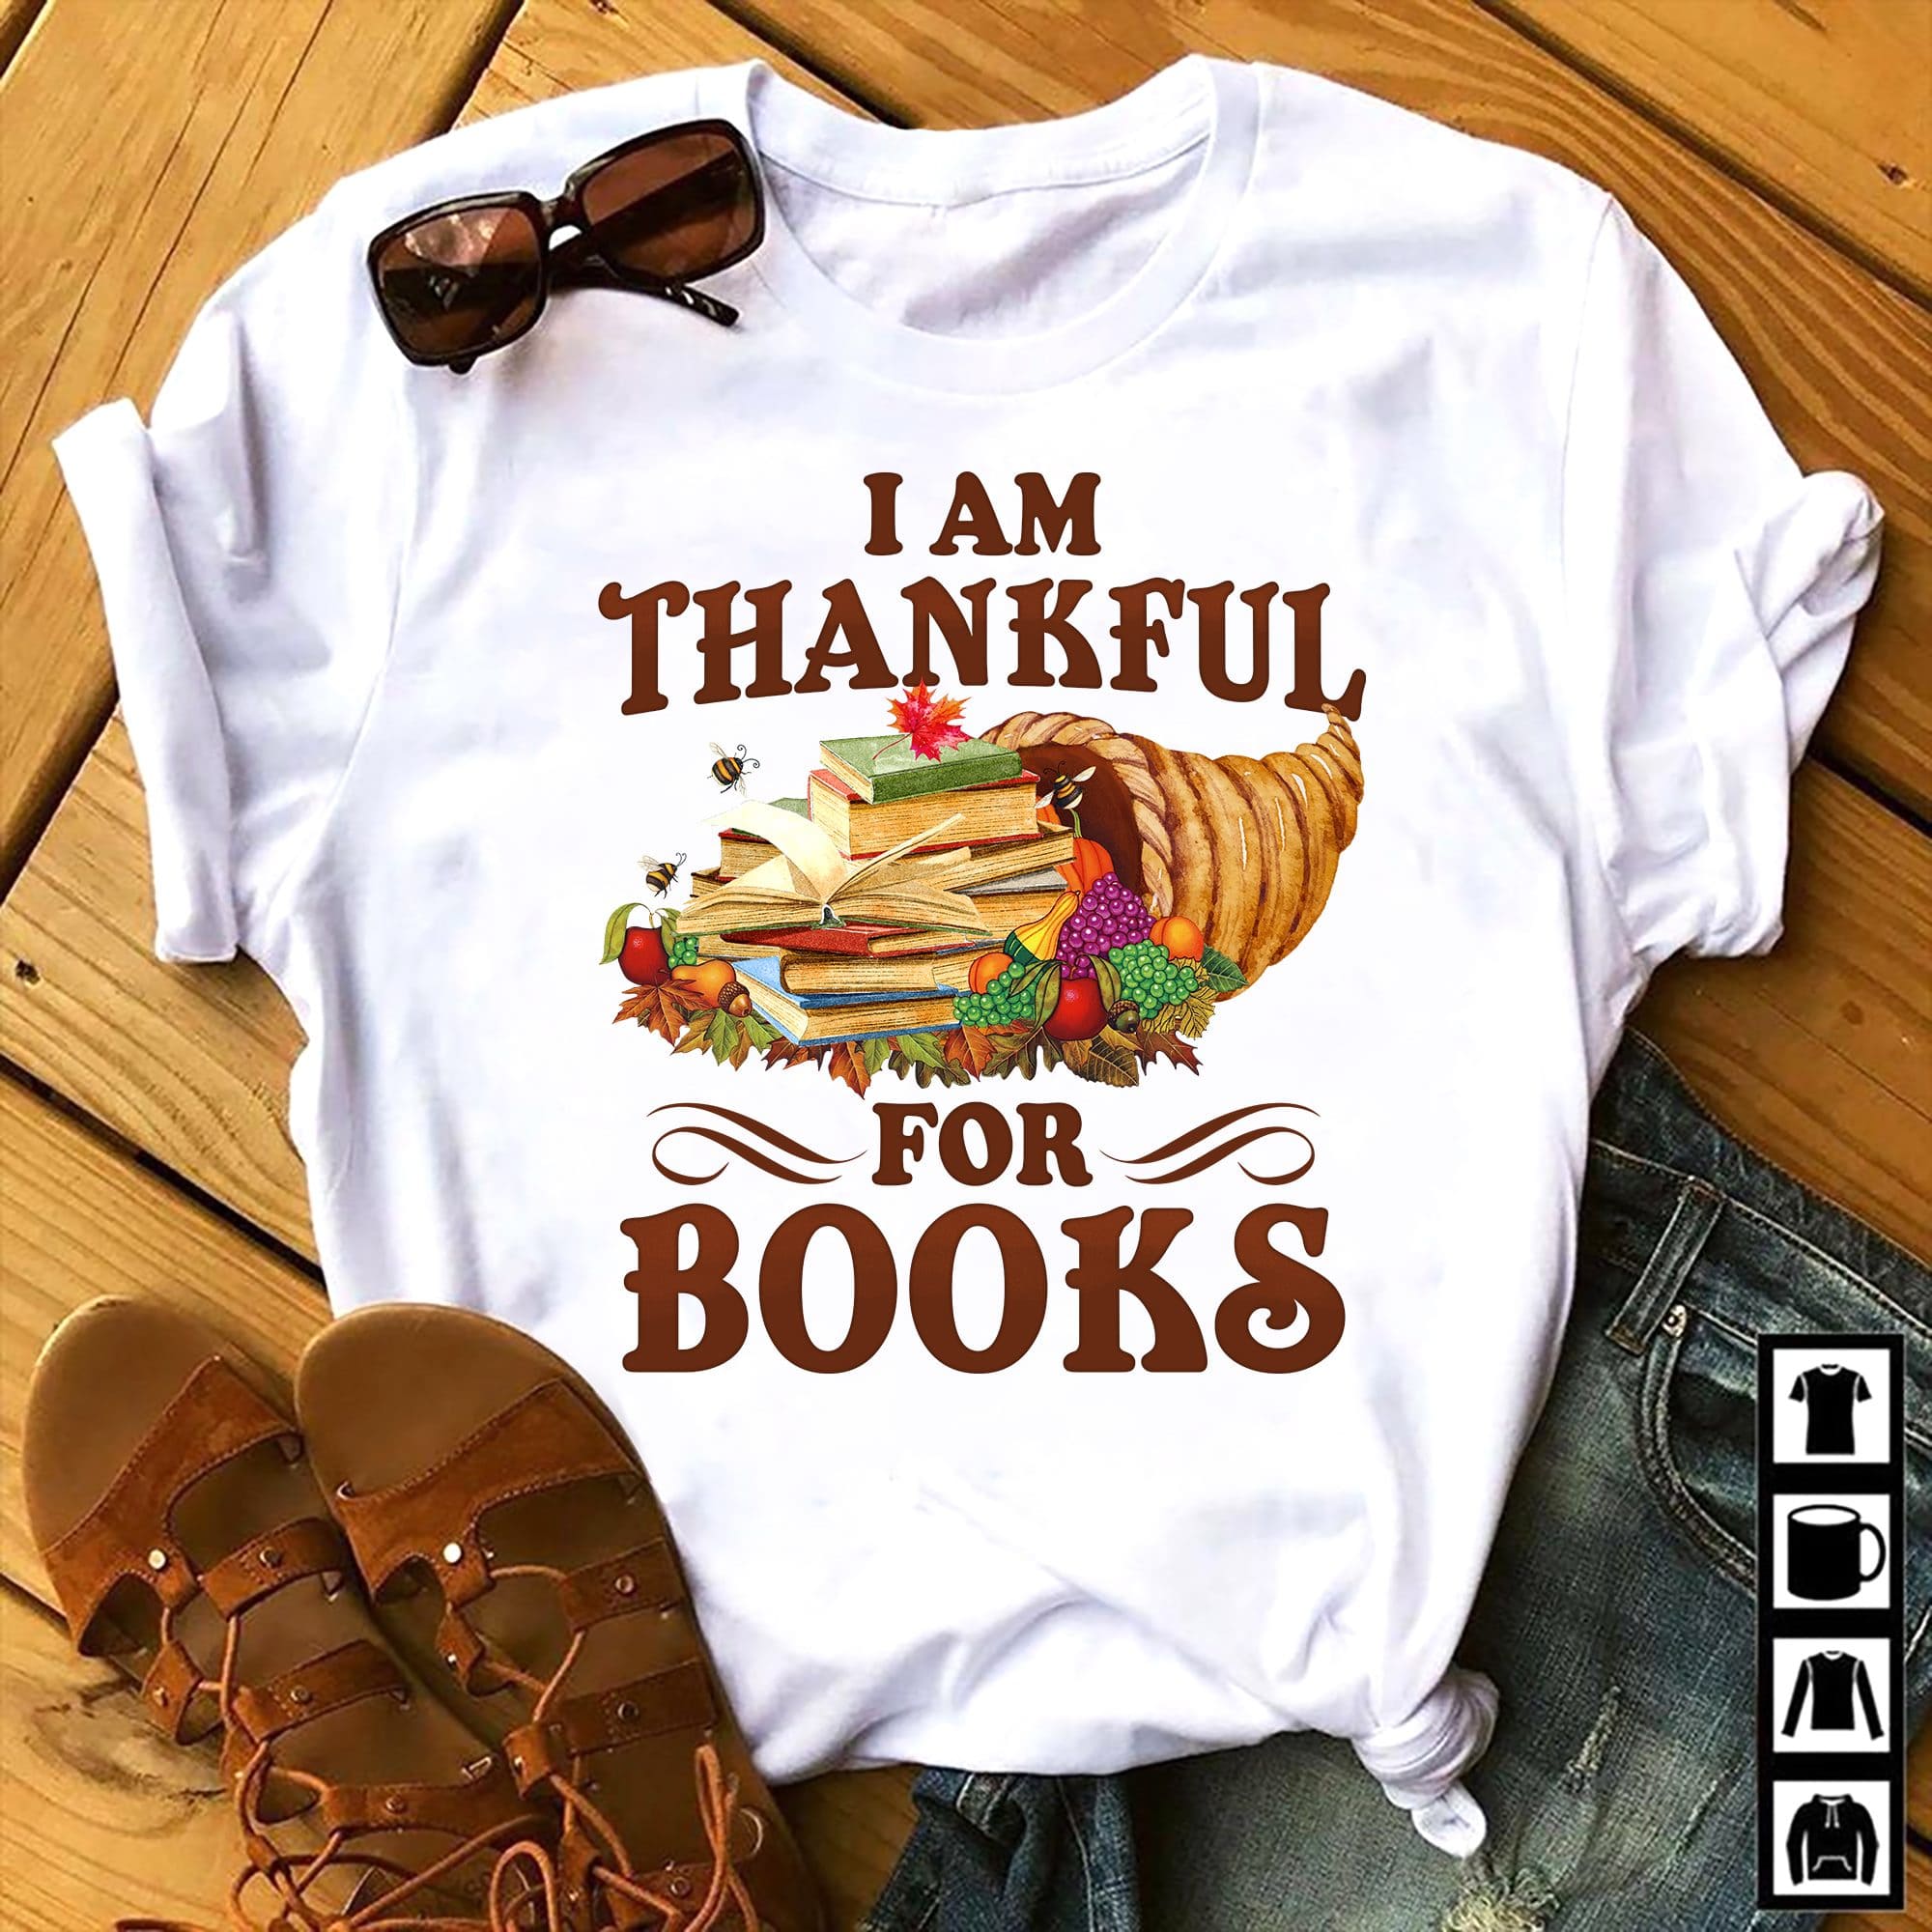 I am thankful for books - Thanksgiving day gift, Book lover T-shirtI am thankful for books - Thanksgiving day gift, Book lover T-shirt